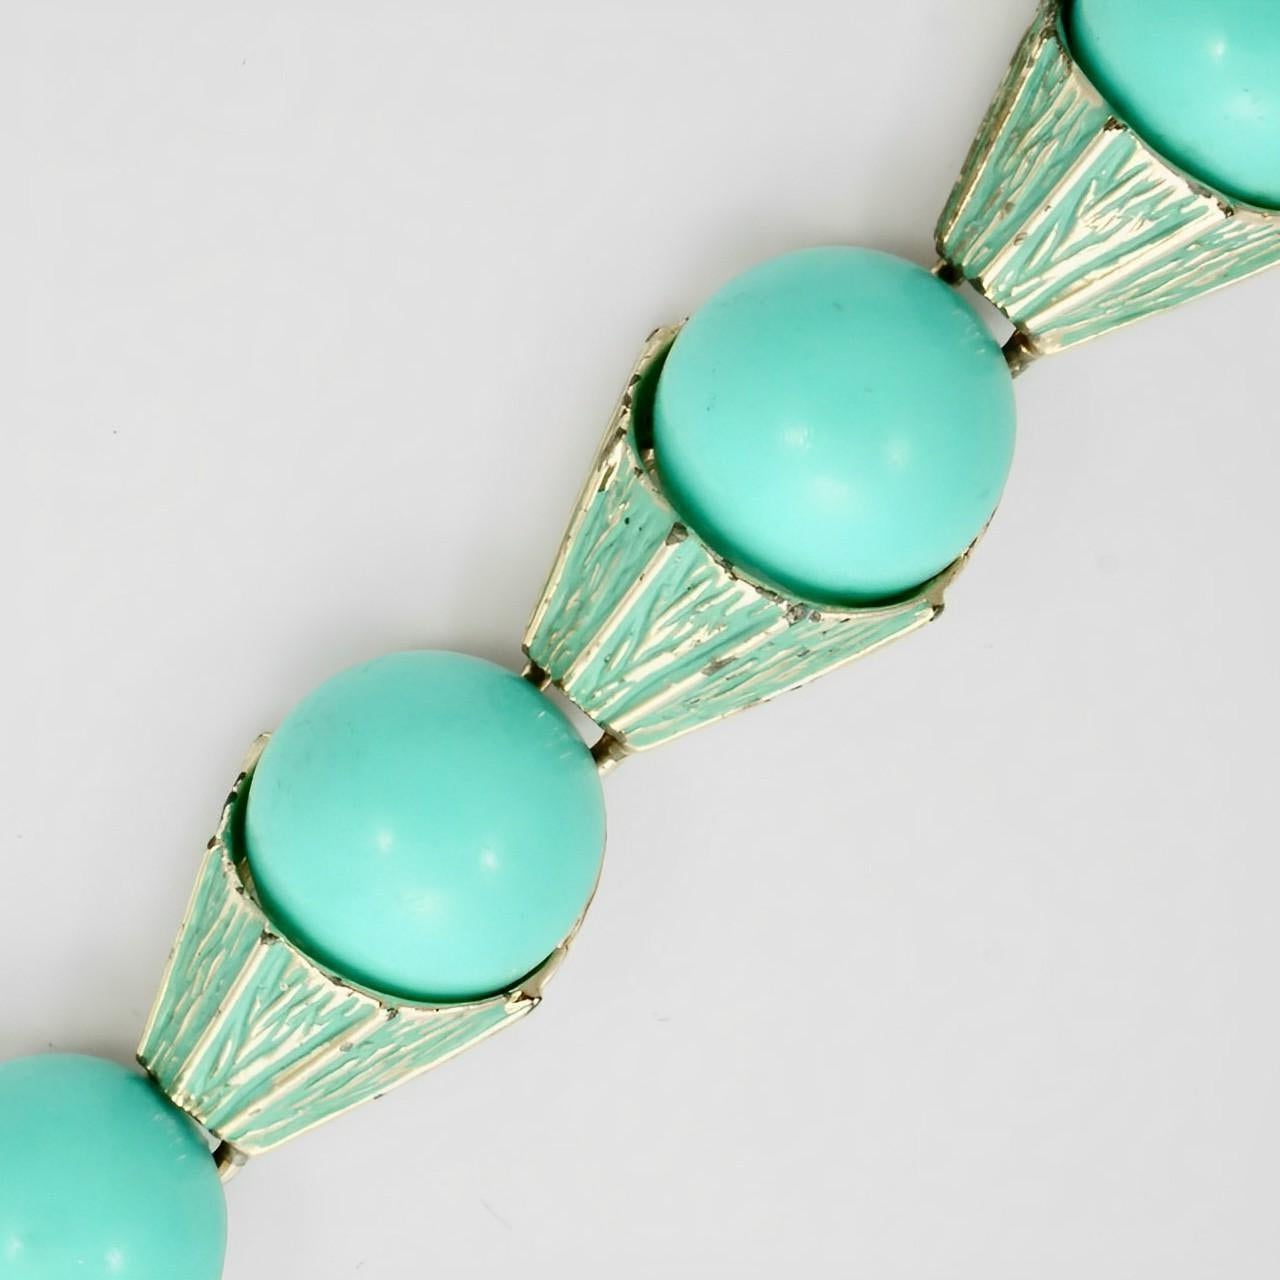 Pale Gold Tone Bracelet with Turquoise Enamel and Lucite Links circa 1960s In Good Condition For Sale In London, GB